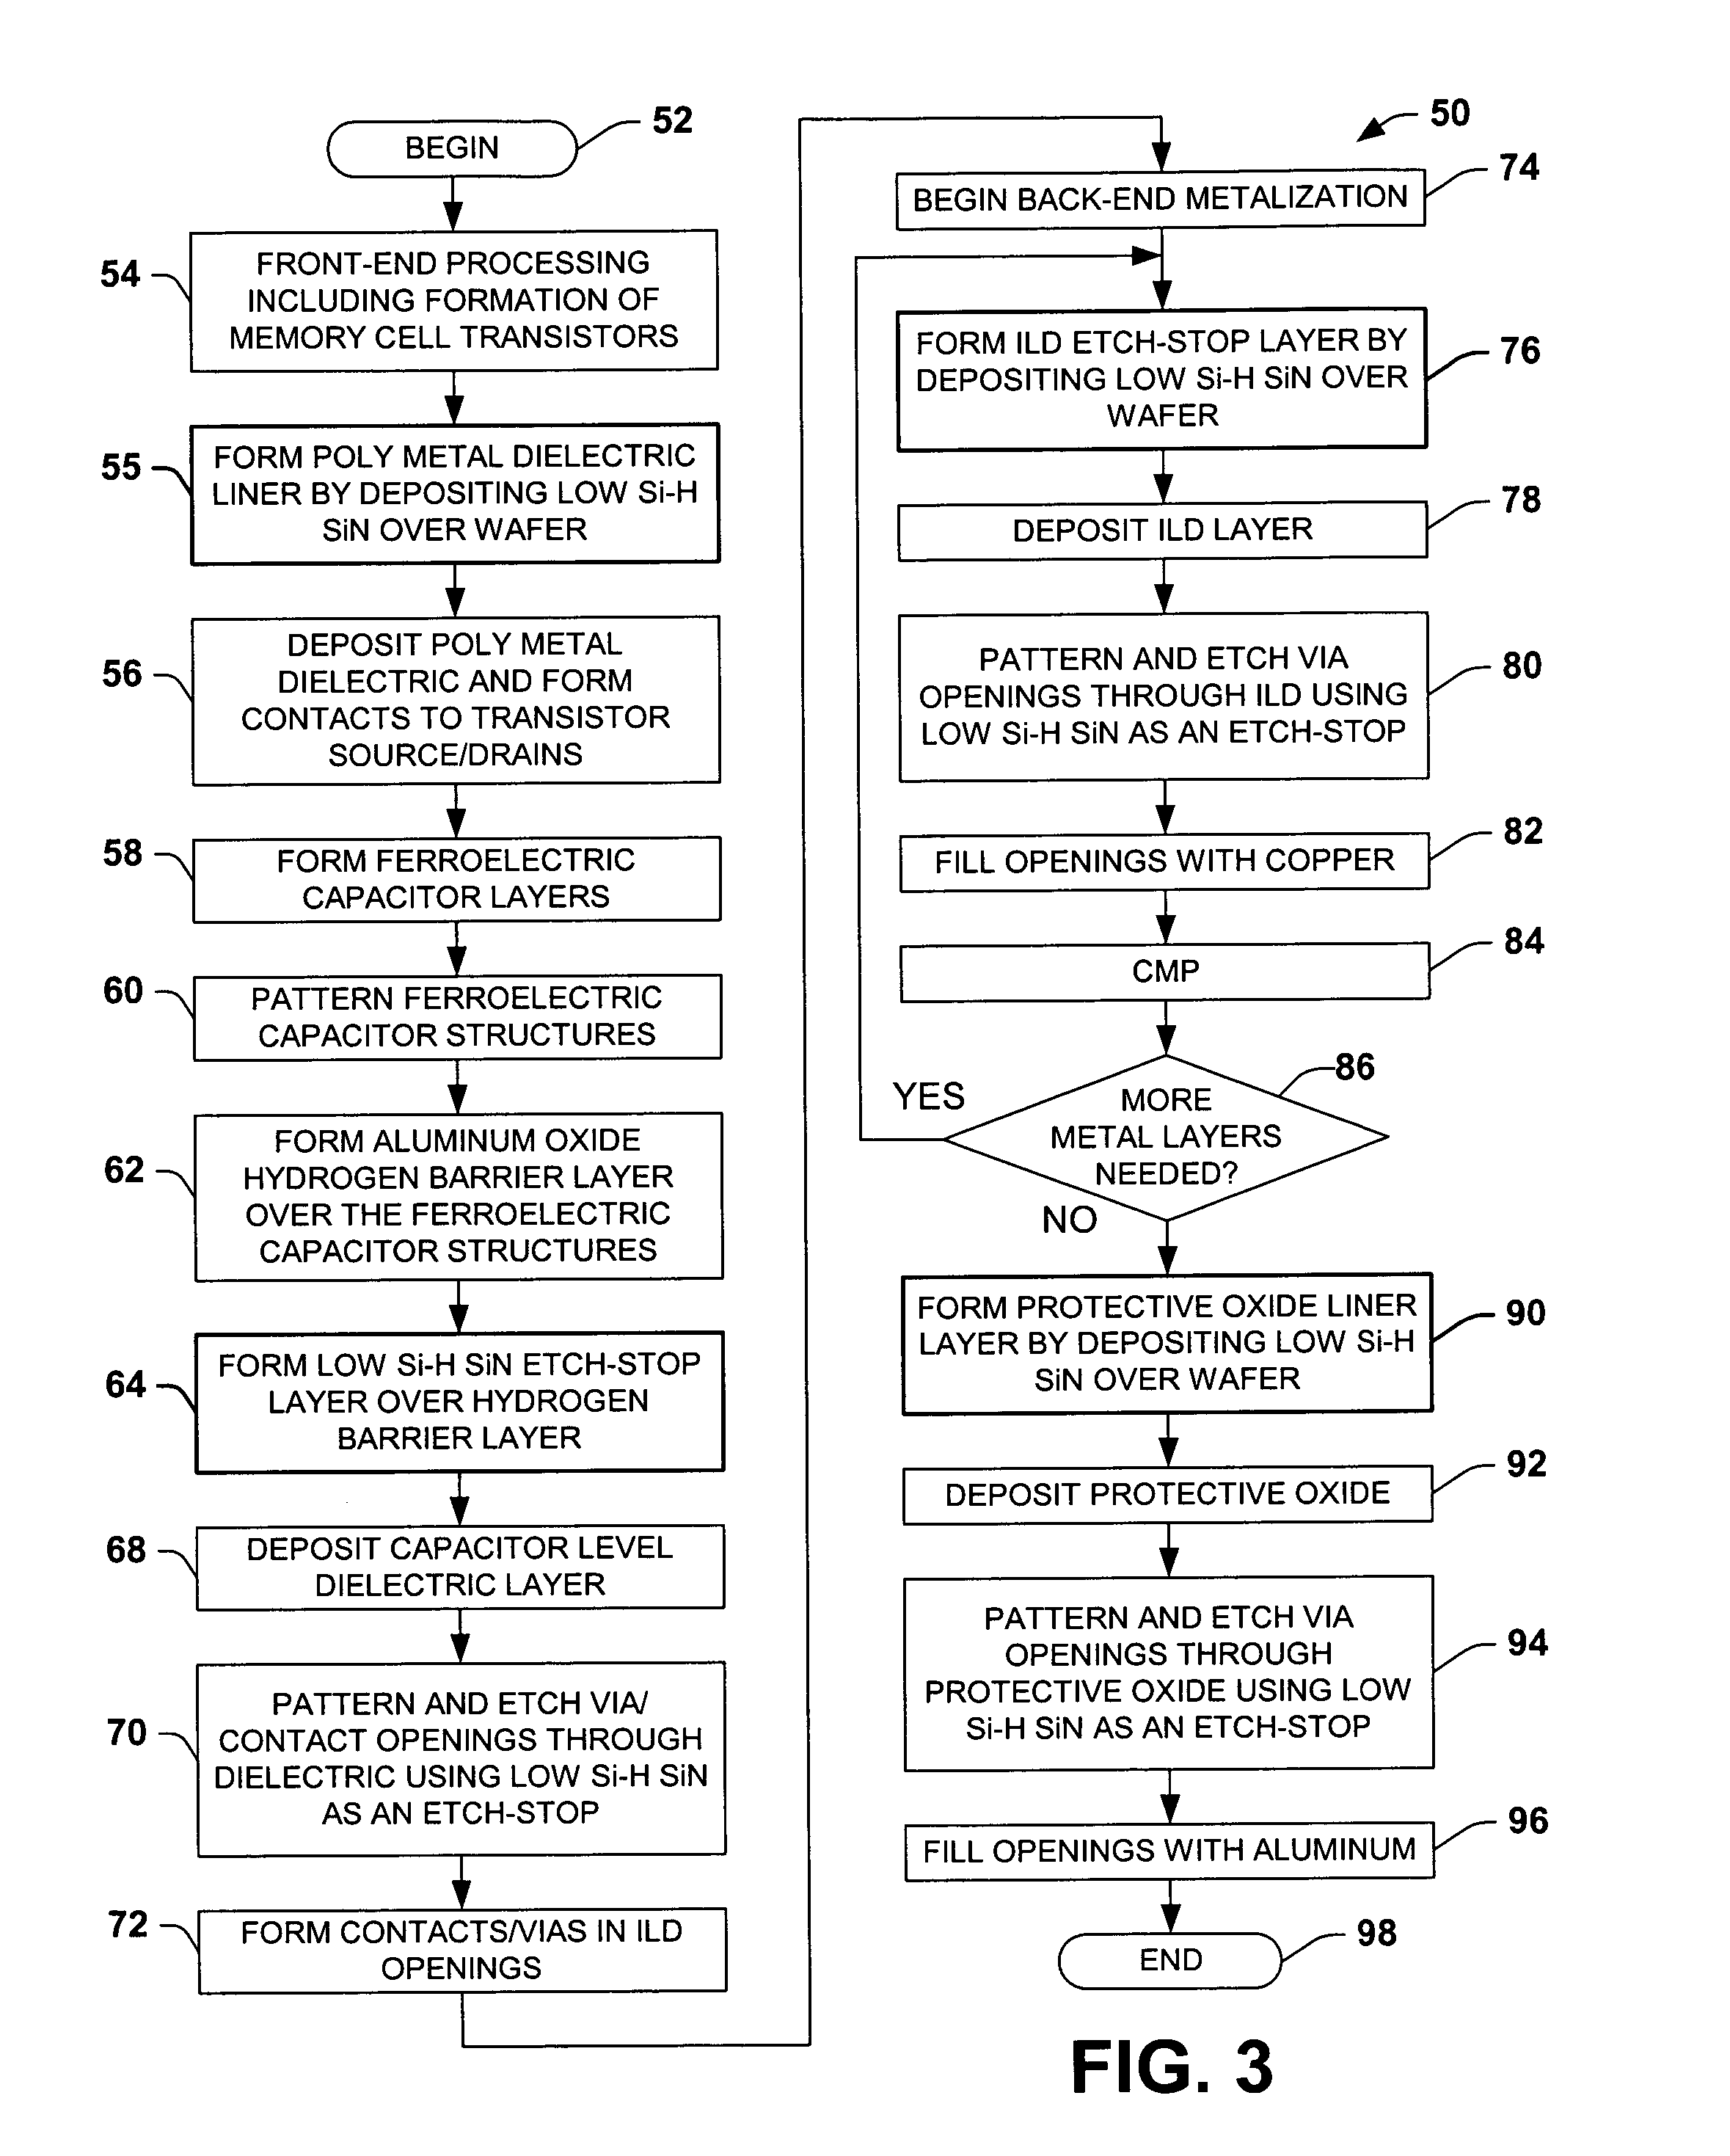 Low silicon-hydrogen sin layer to inhibit hydrogen related degradation in semiconductor devices having ferroelectric components